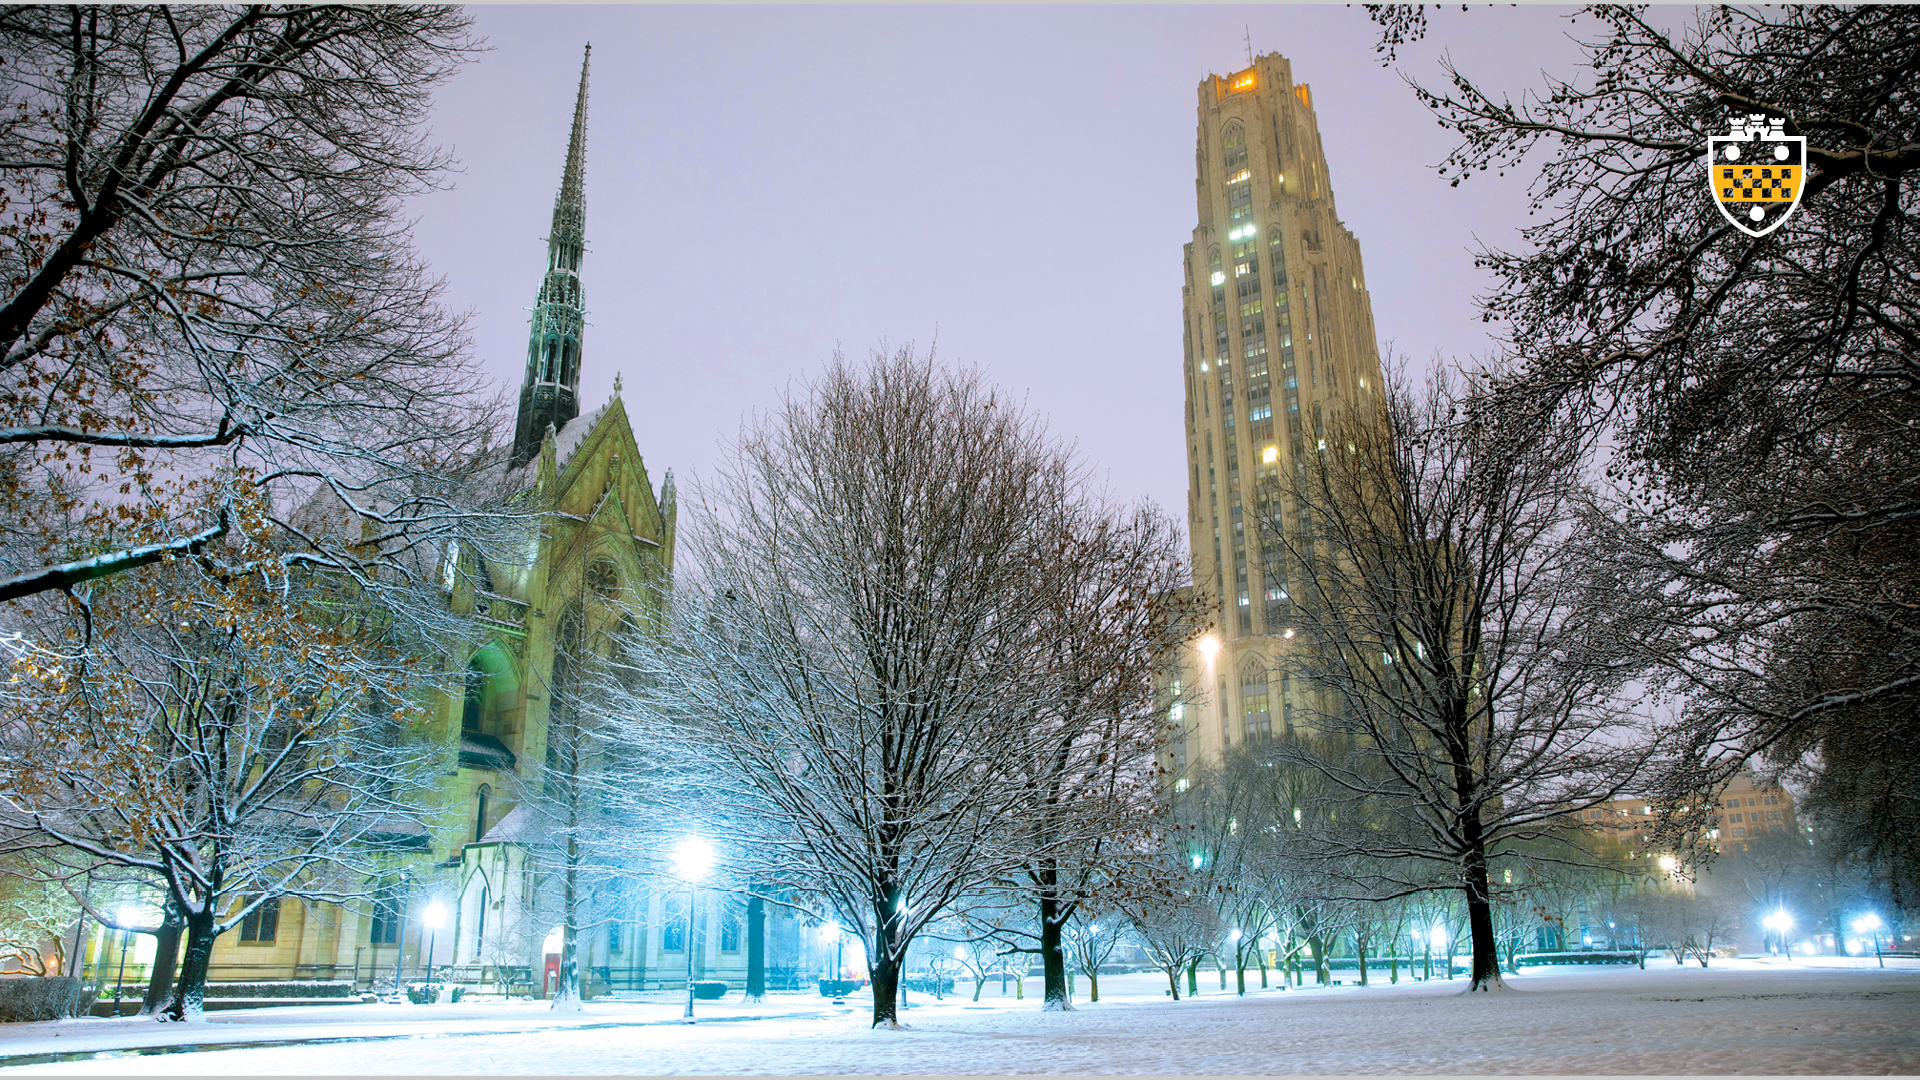 Snow on campus cathedral